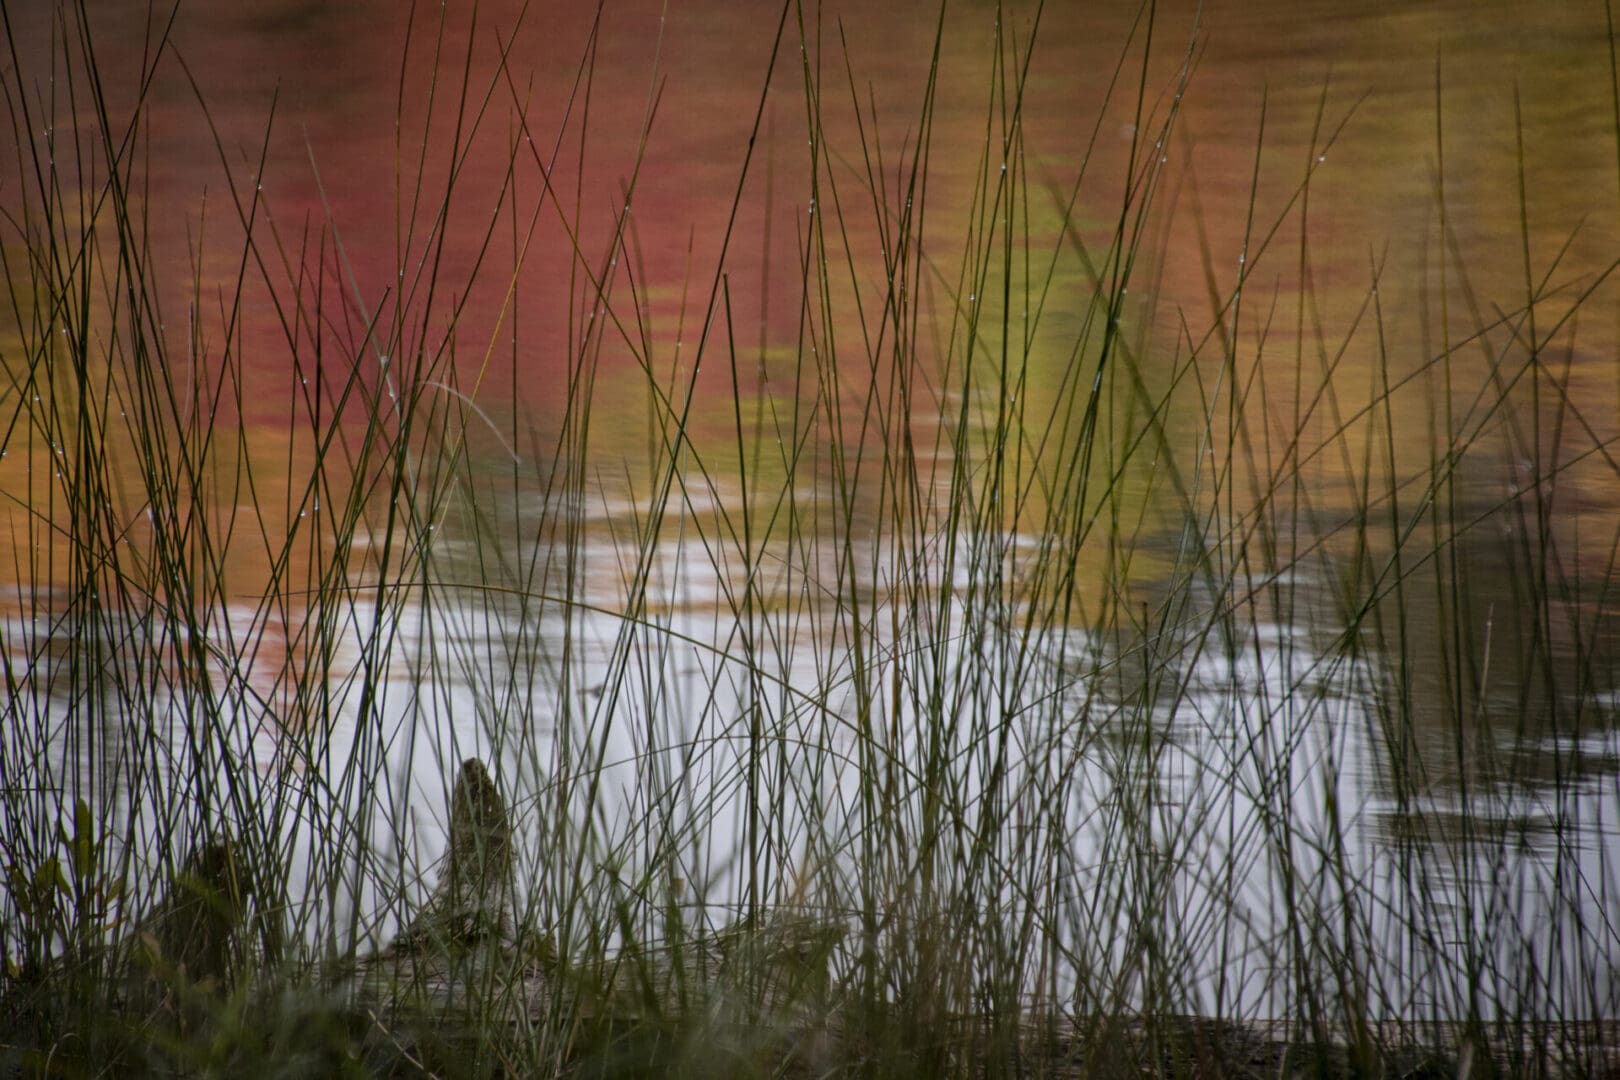 A pond with colorful reeds in the background.